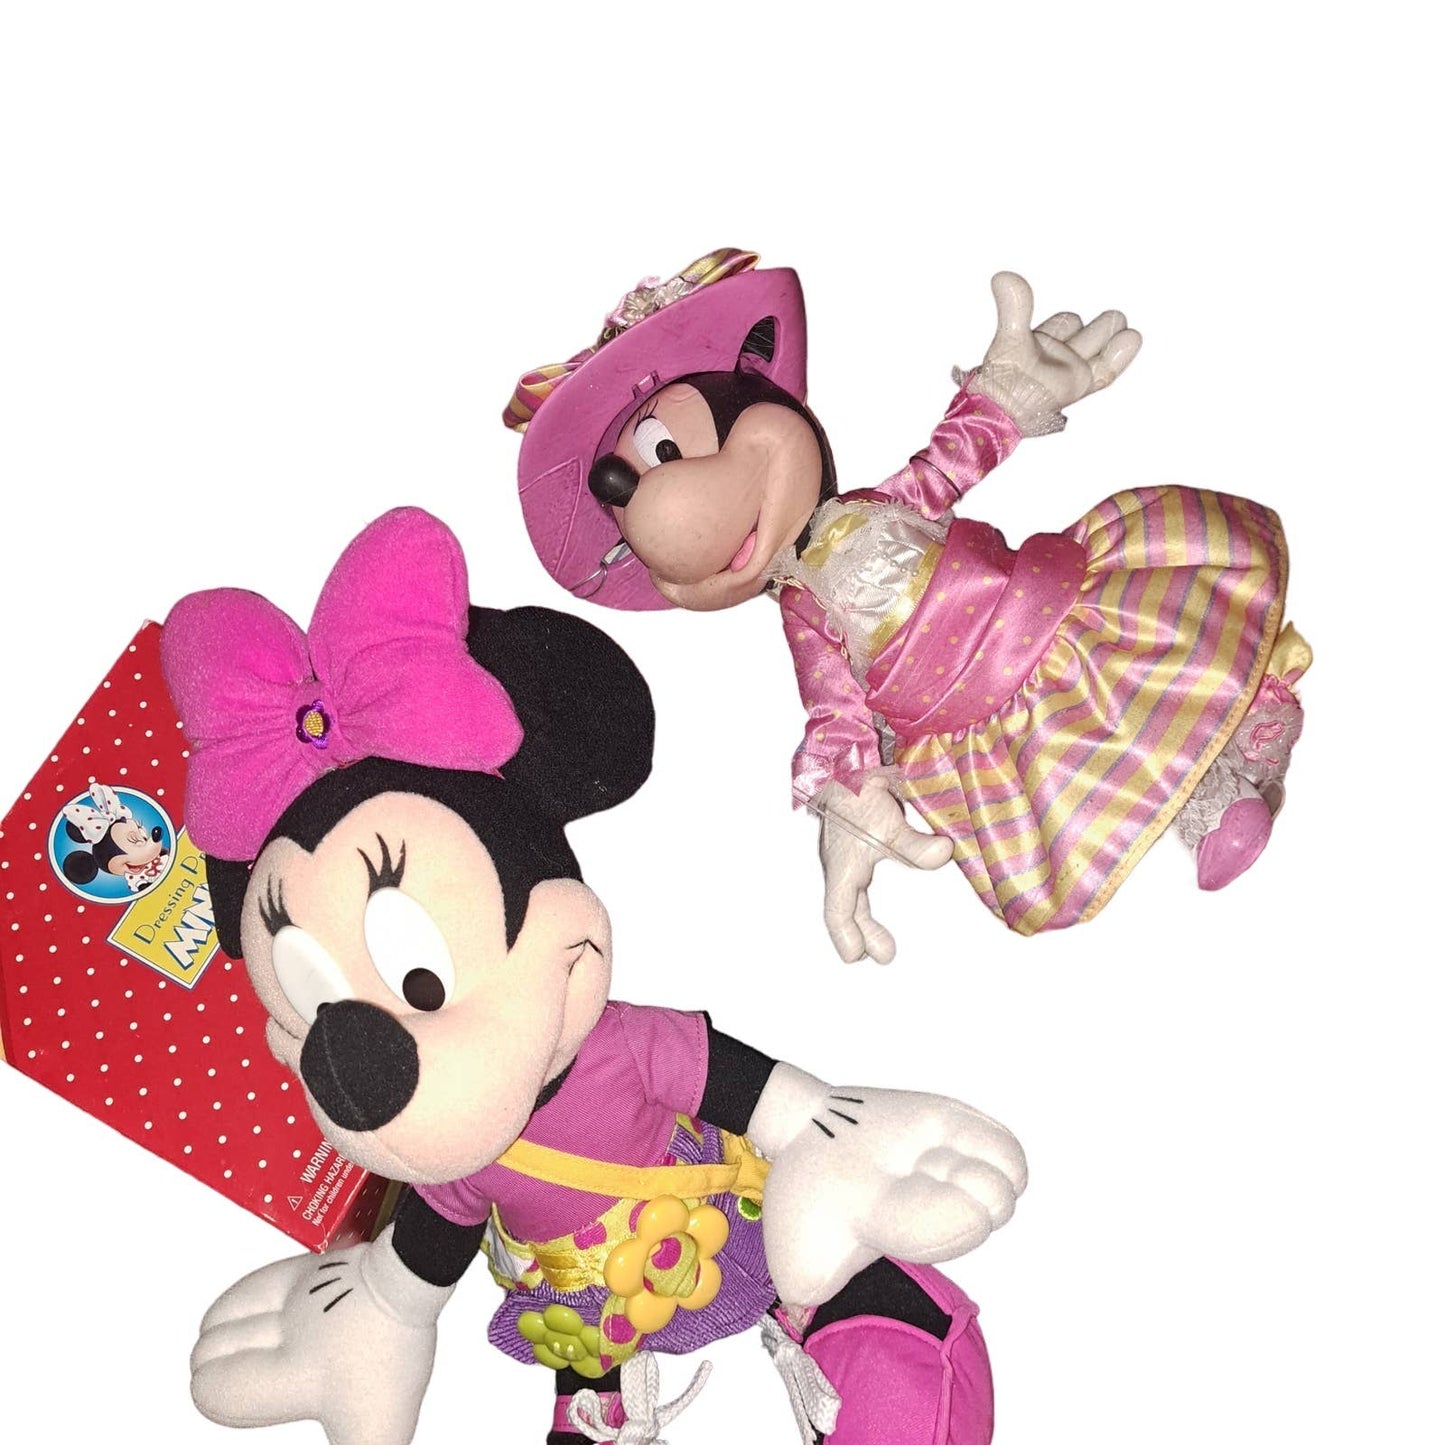 NIB-MINNIE MOUSE 3 Collectable Dolls! Very Victorian-Pretty Minnie-Dressed Up